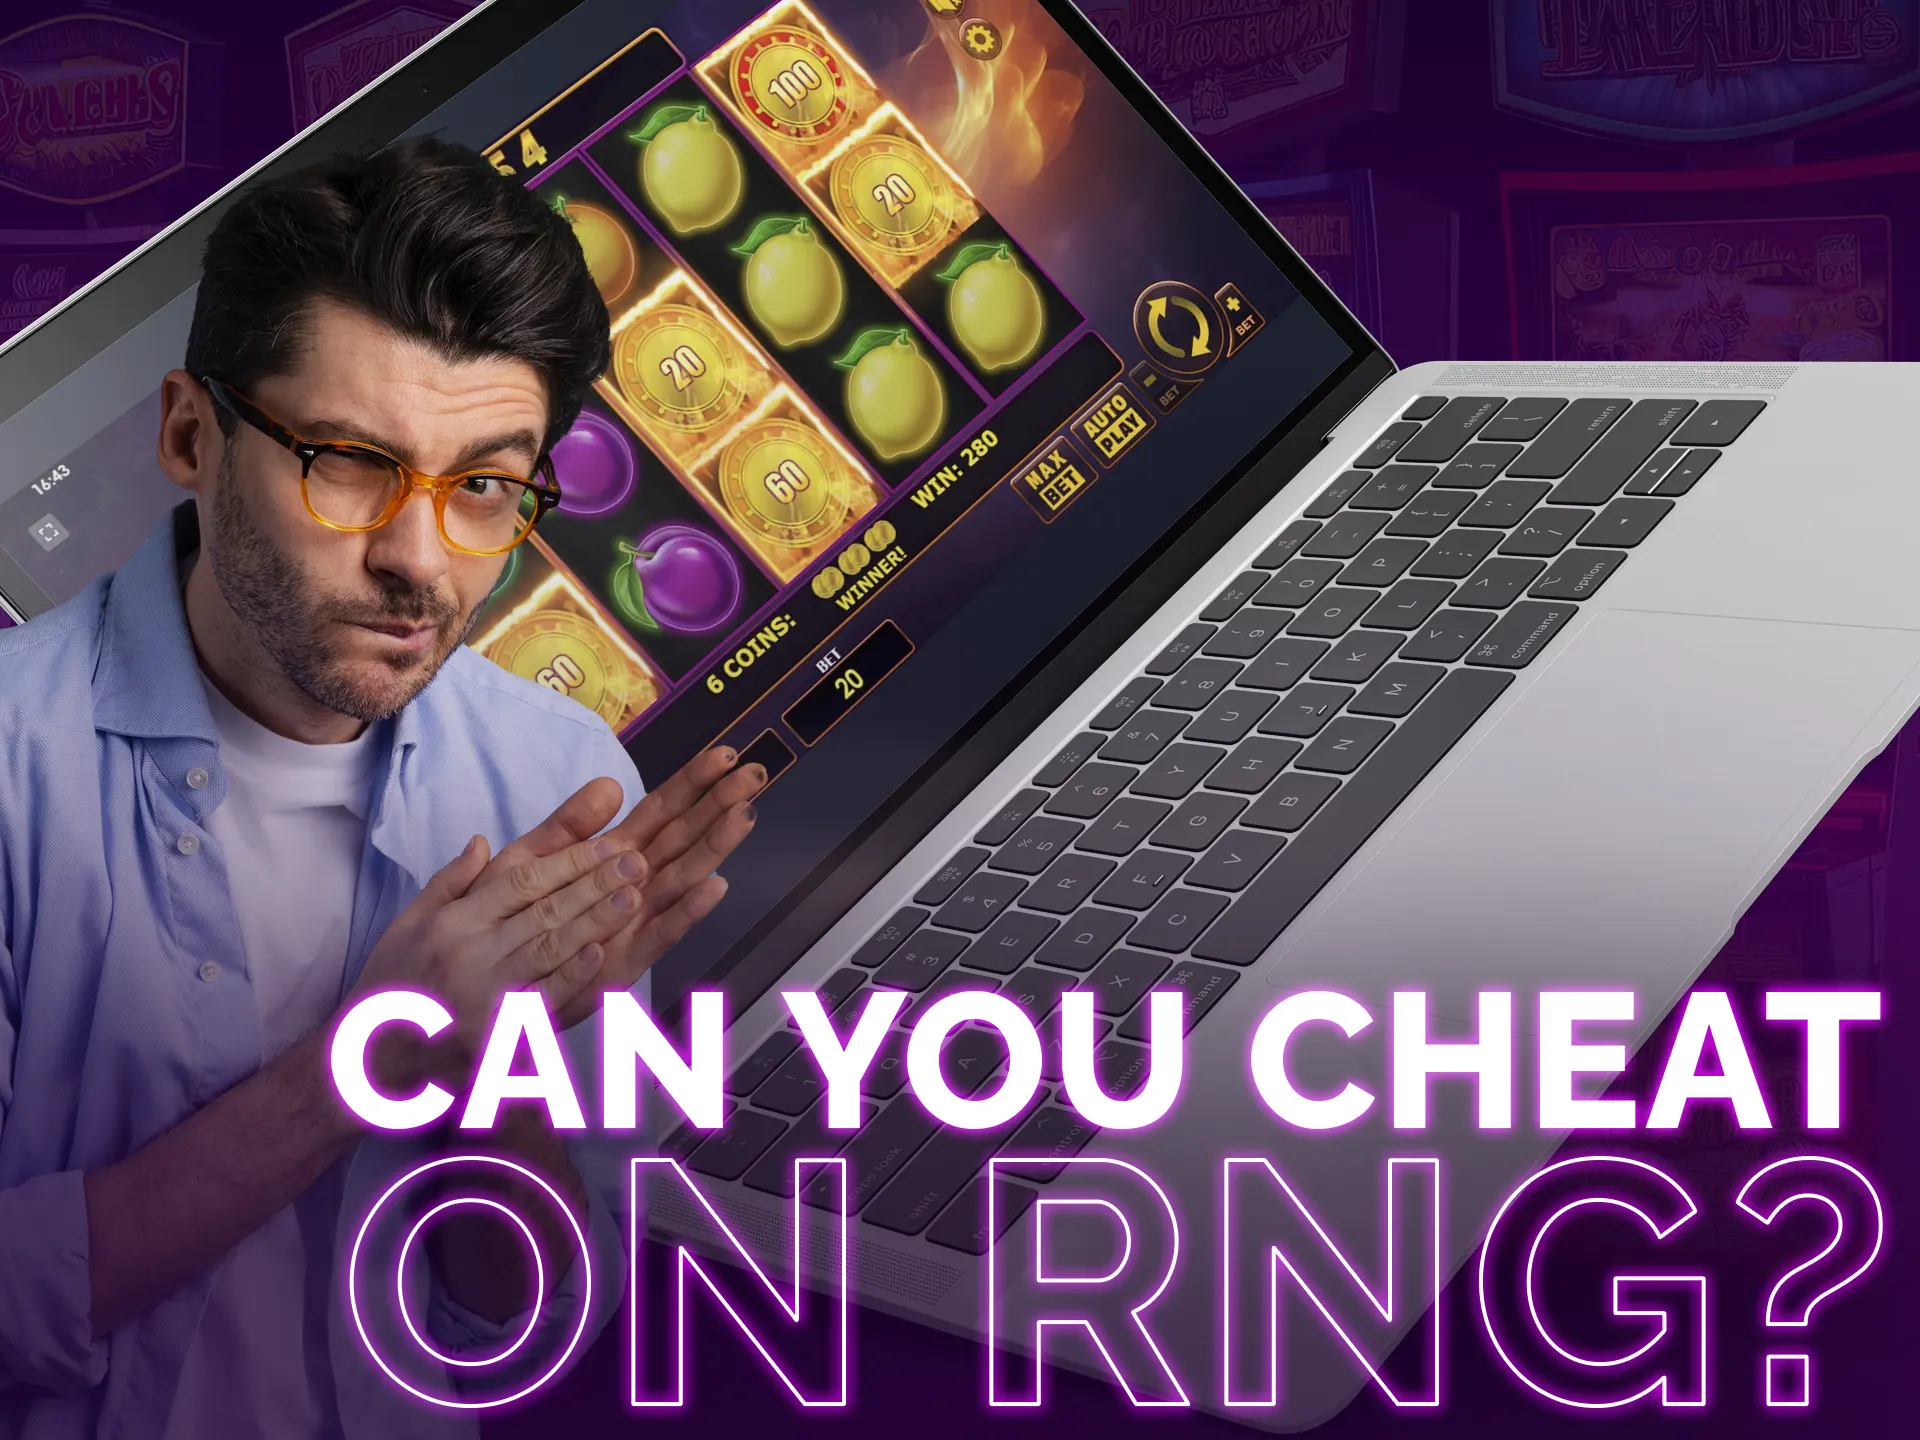 You can't cheat on real RNG in slot machines.